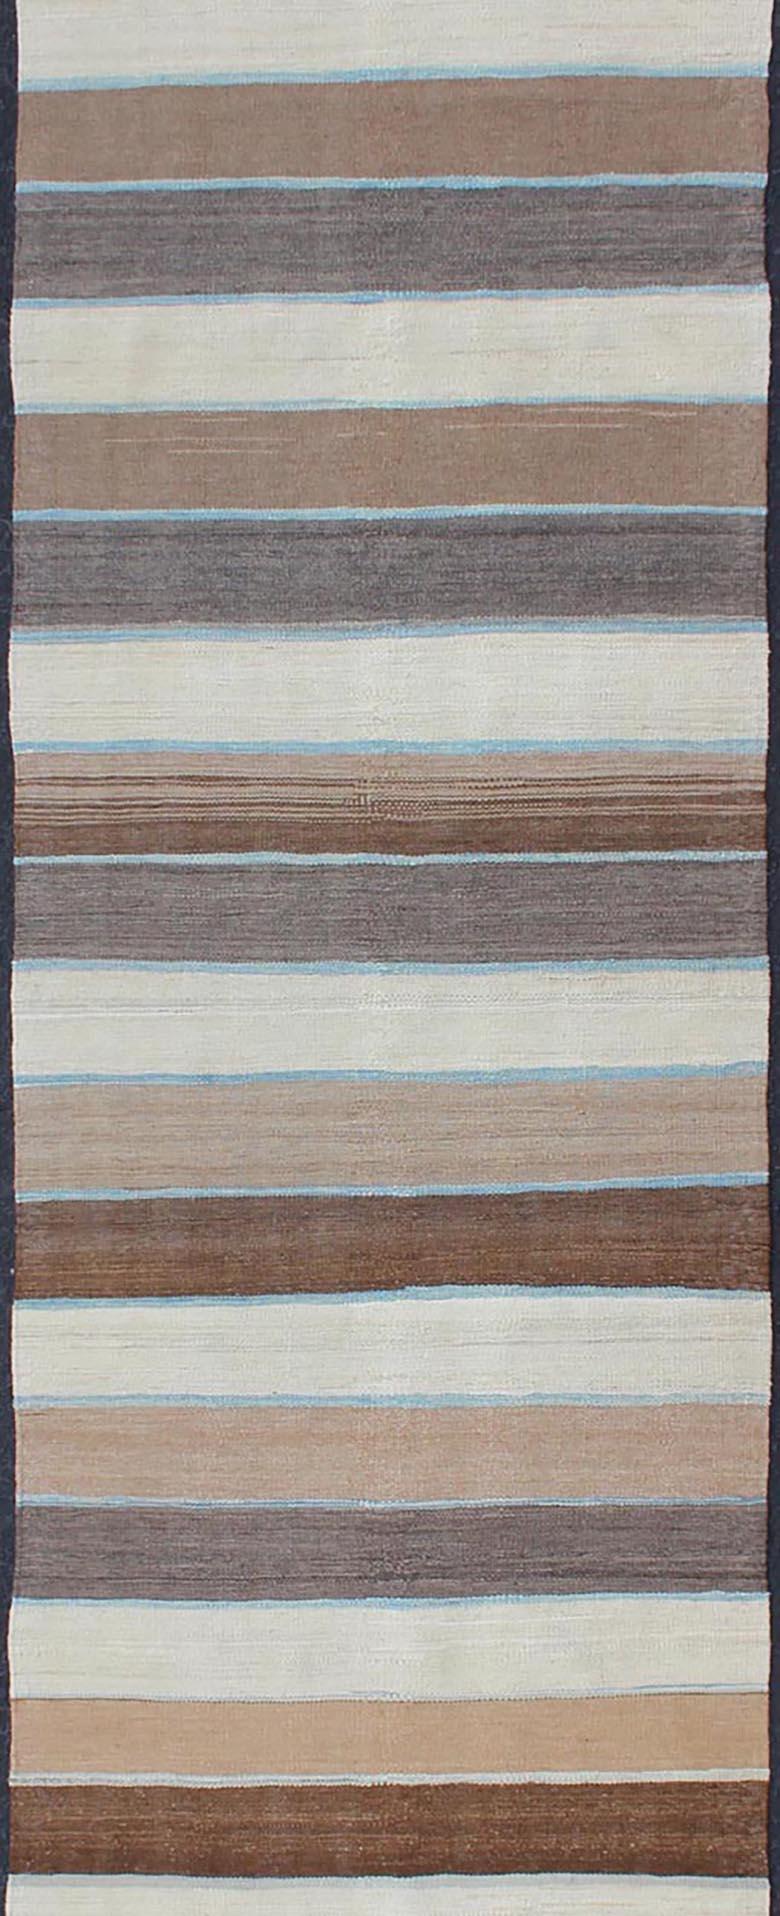 Flat-weave Kilim rug with stripes with modern design in shades of blue, taupe gray and cream, Keivan Woven Arts / rug afg-27738, country of origin / type: Afghanistan / Kilim

This playful piece features a Classic stripe design that evokes casual